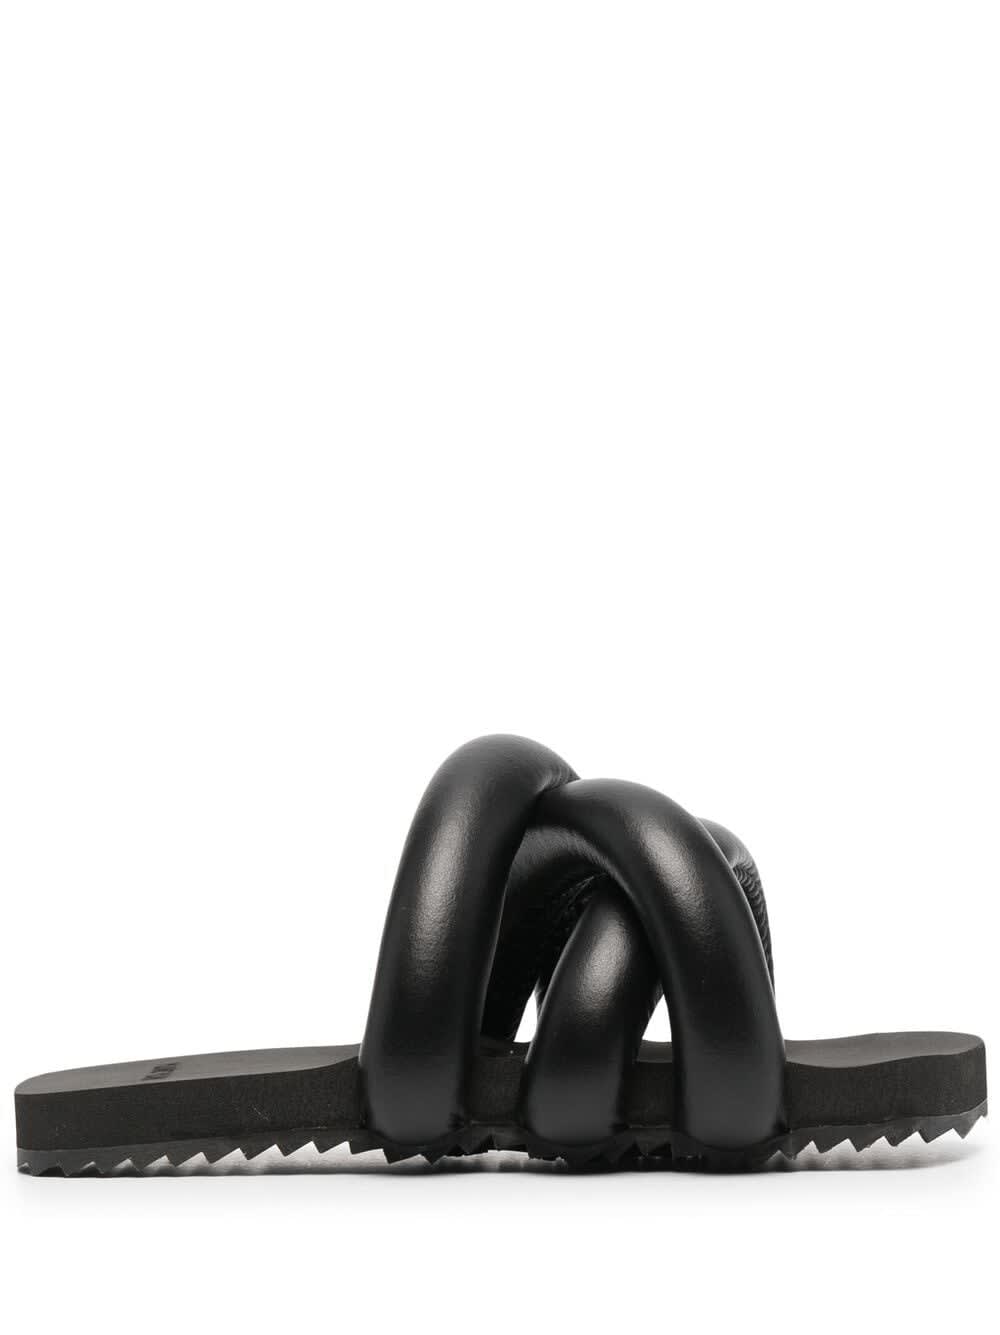 YUME YUME Black Mule Tire In Vegan Leather Detail With Crossed Bands